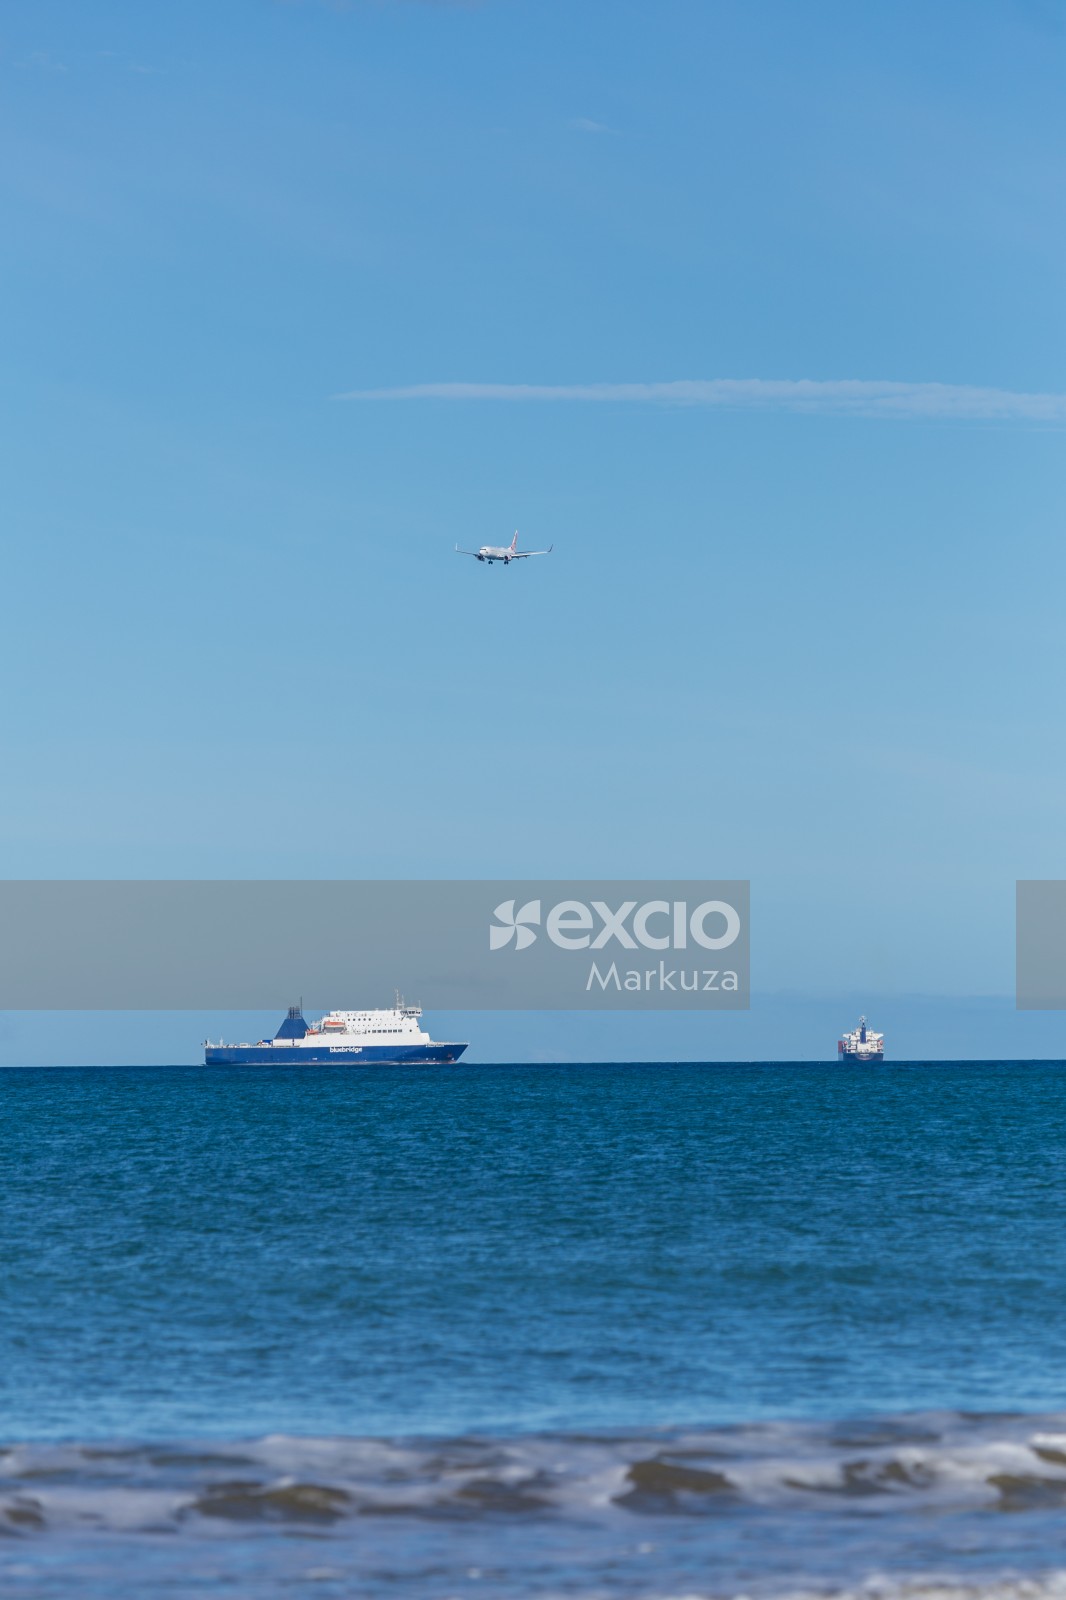 Bluebridge boat and AIR NZ aircraft out in the strait